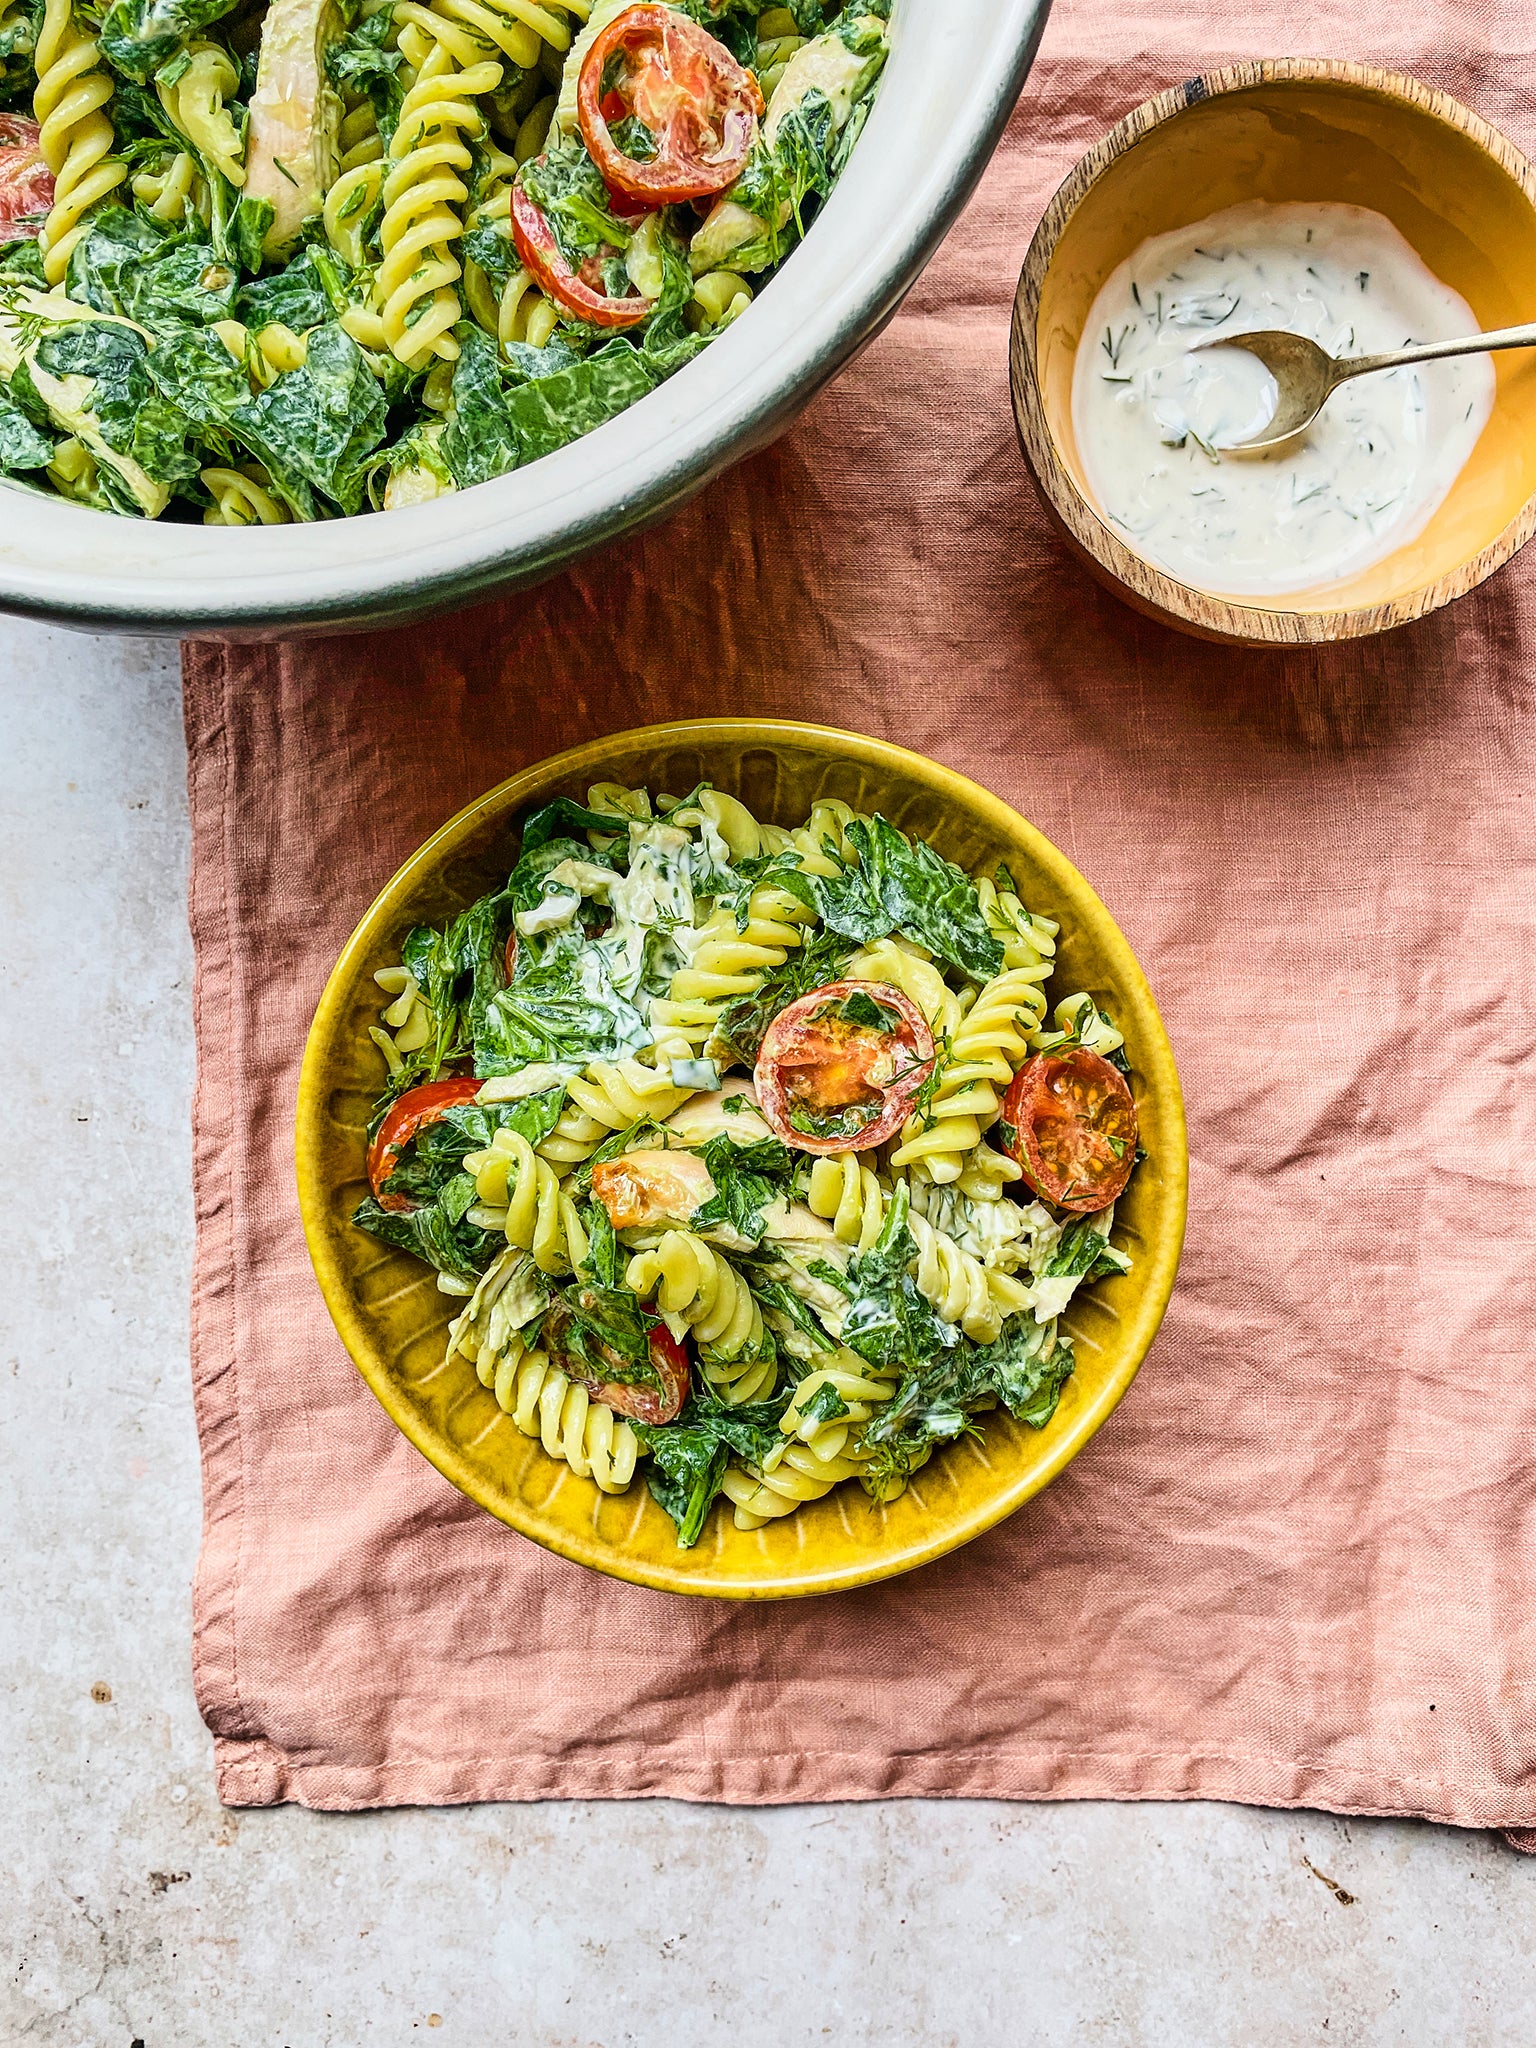 This pasta salad with spinach, chicken and tomato brings a Mediterranean touch to lunchtime.